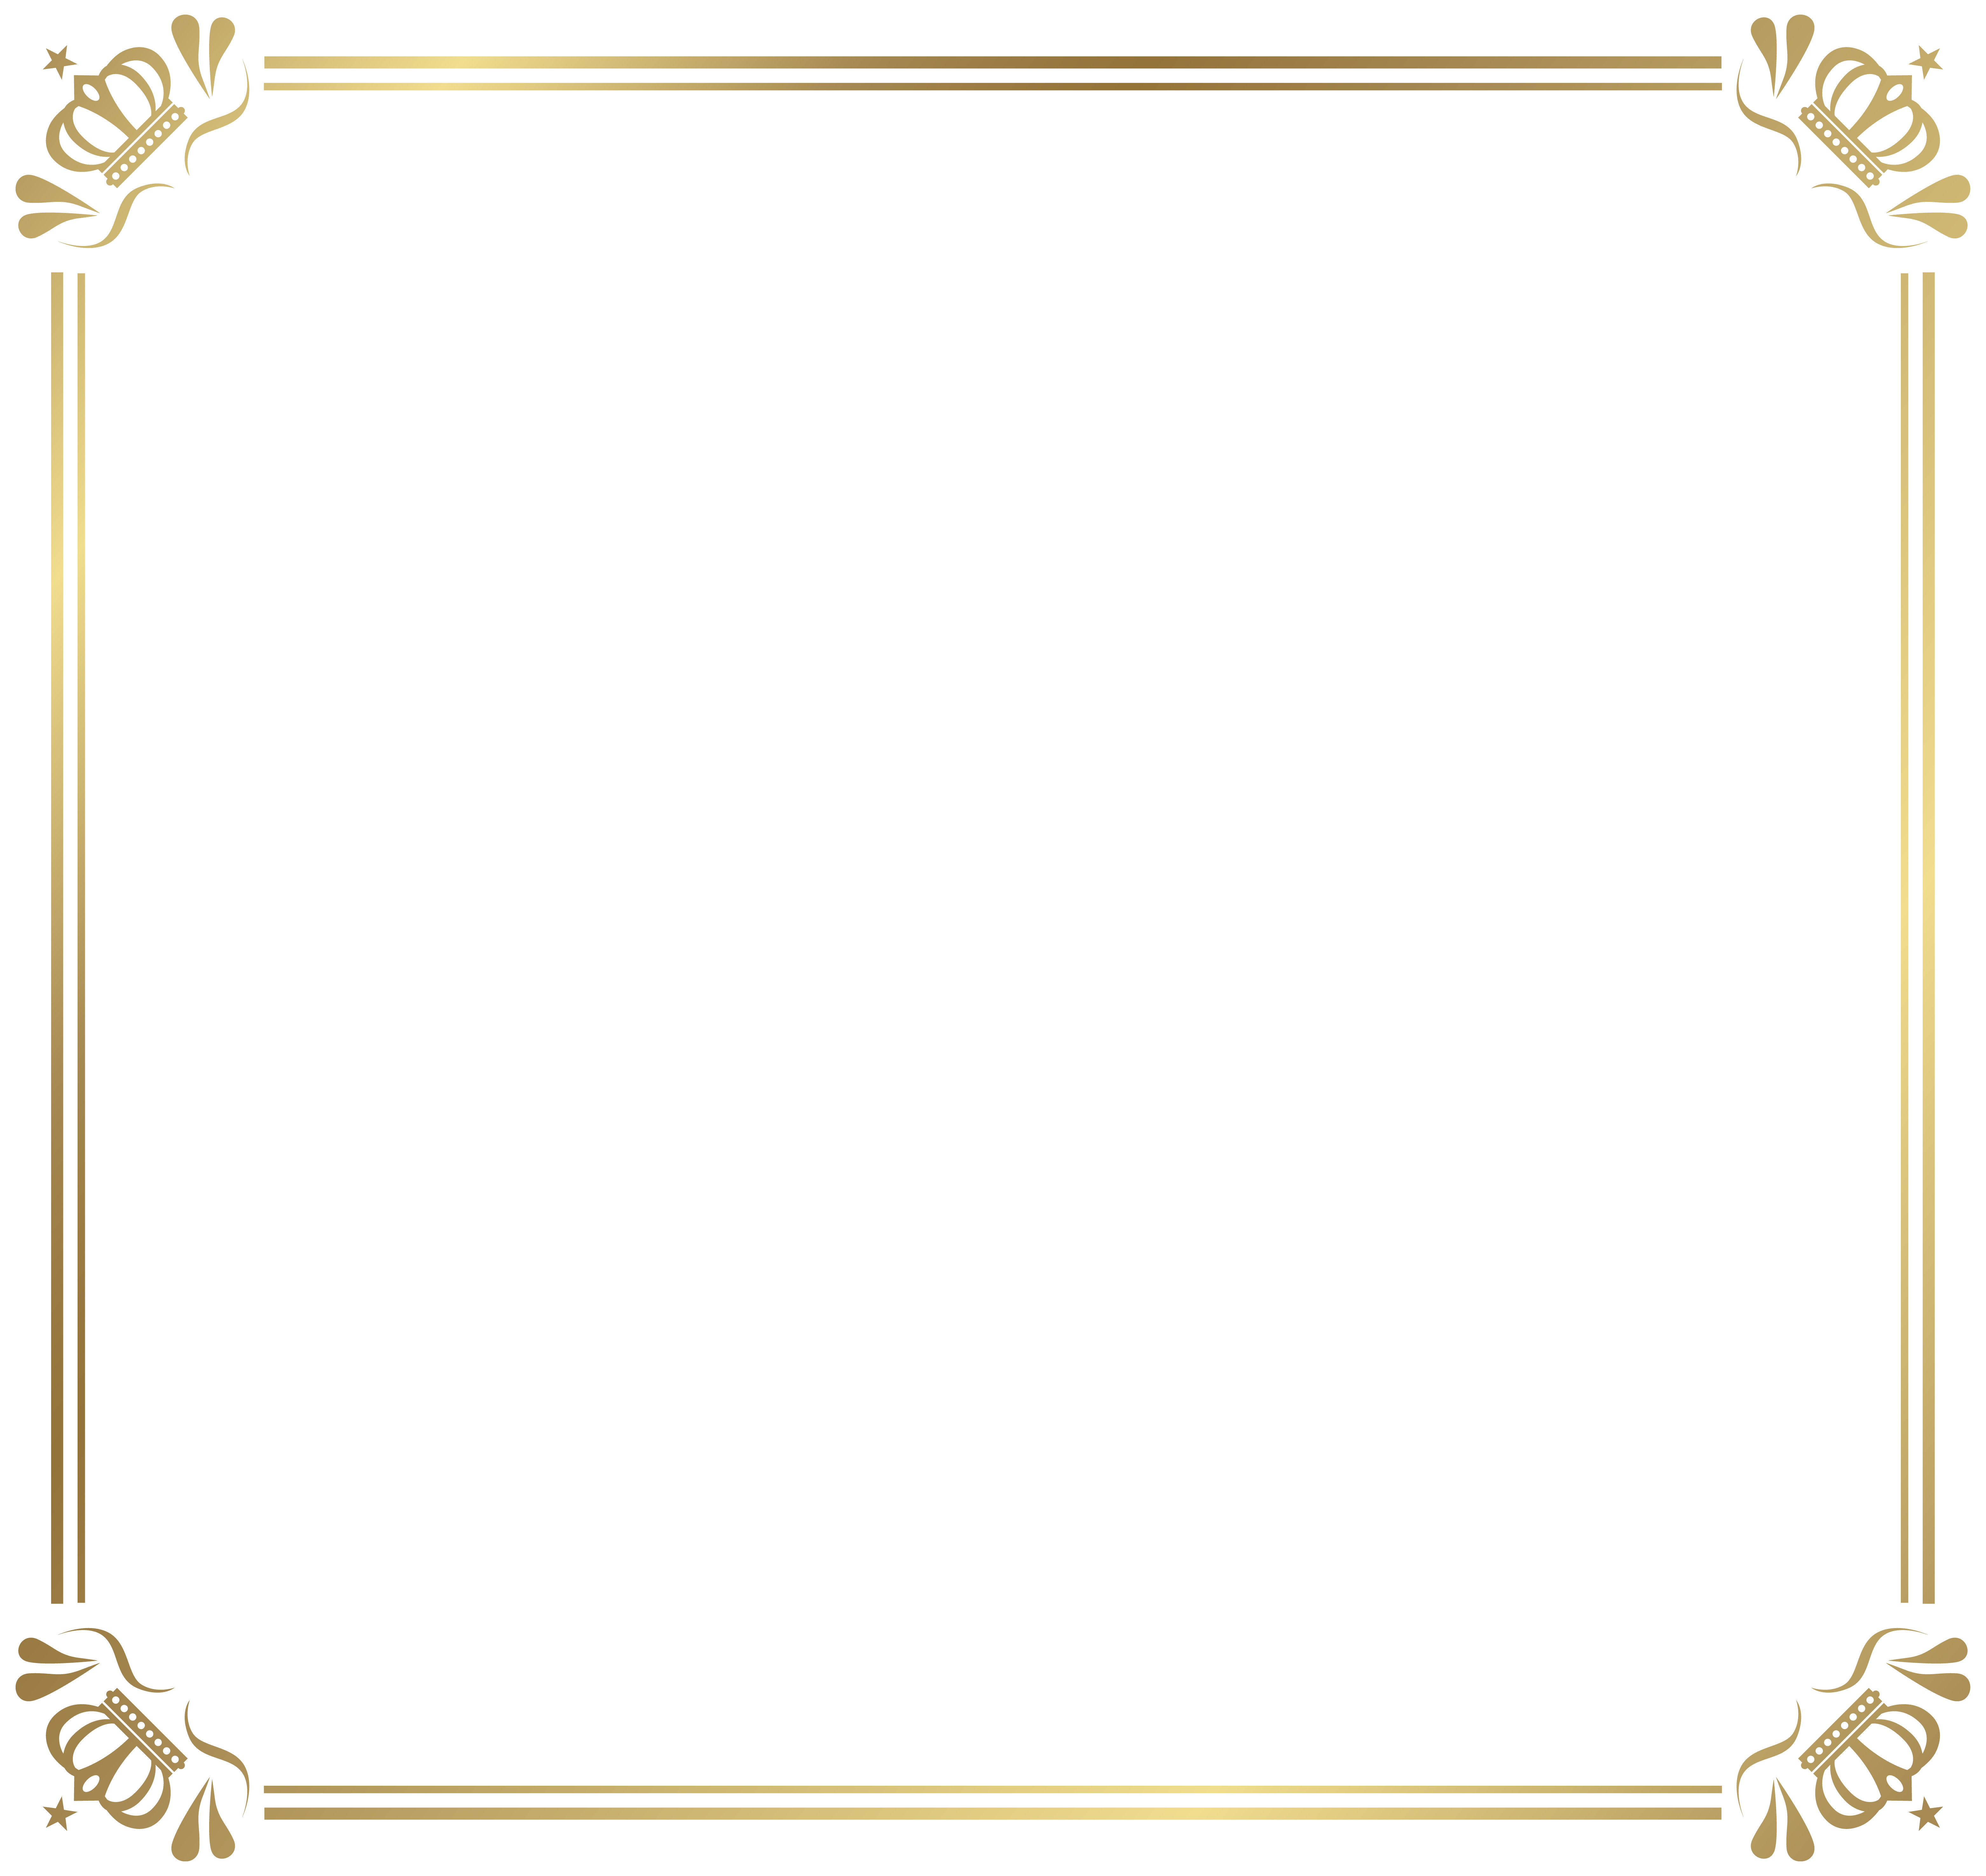 Border with crowns png. Clipart crown frame